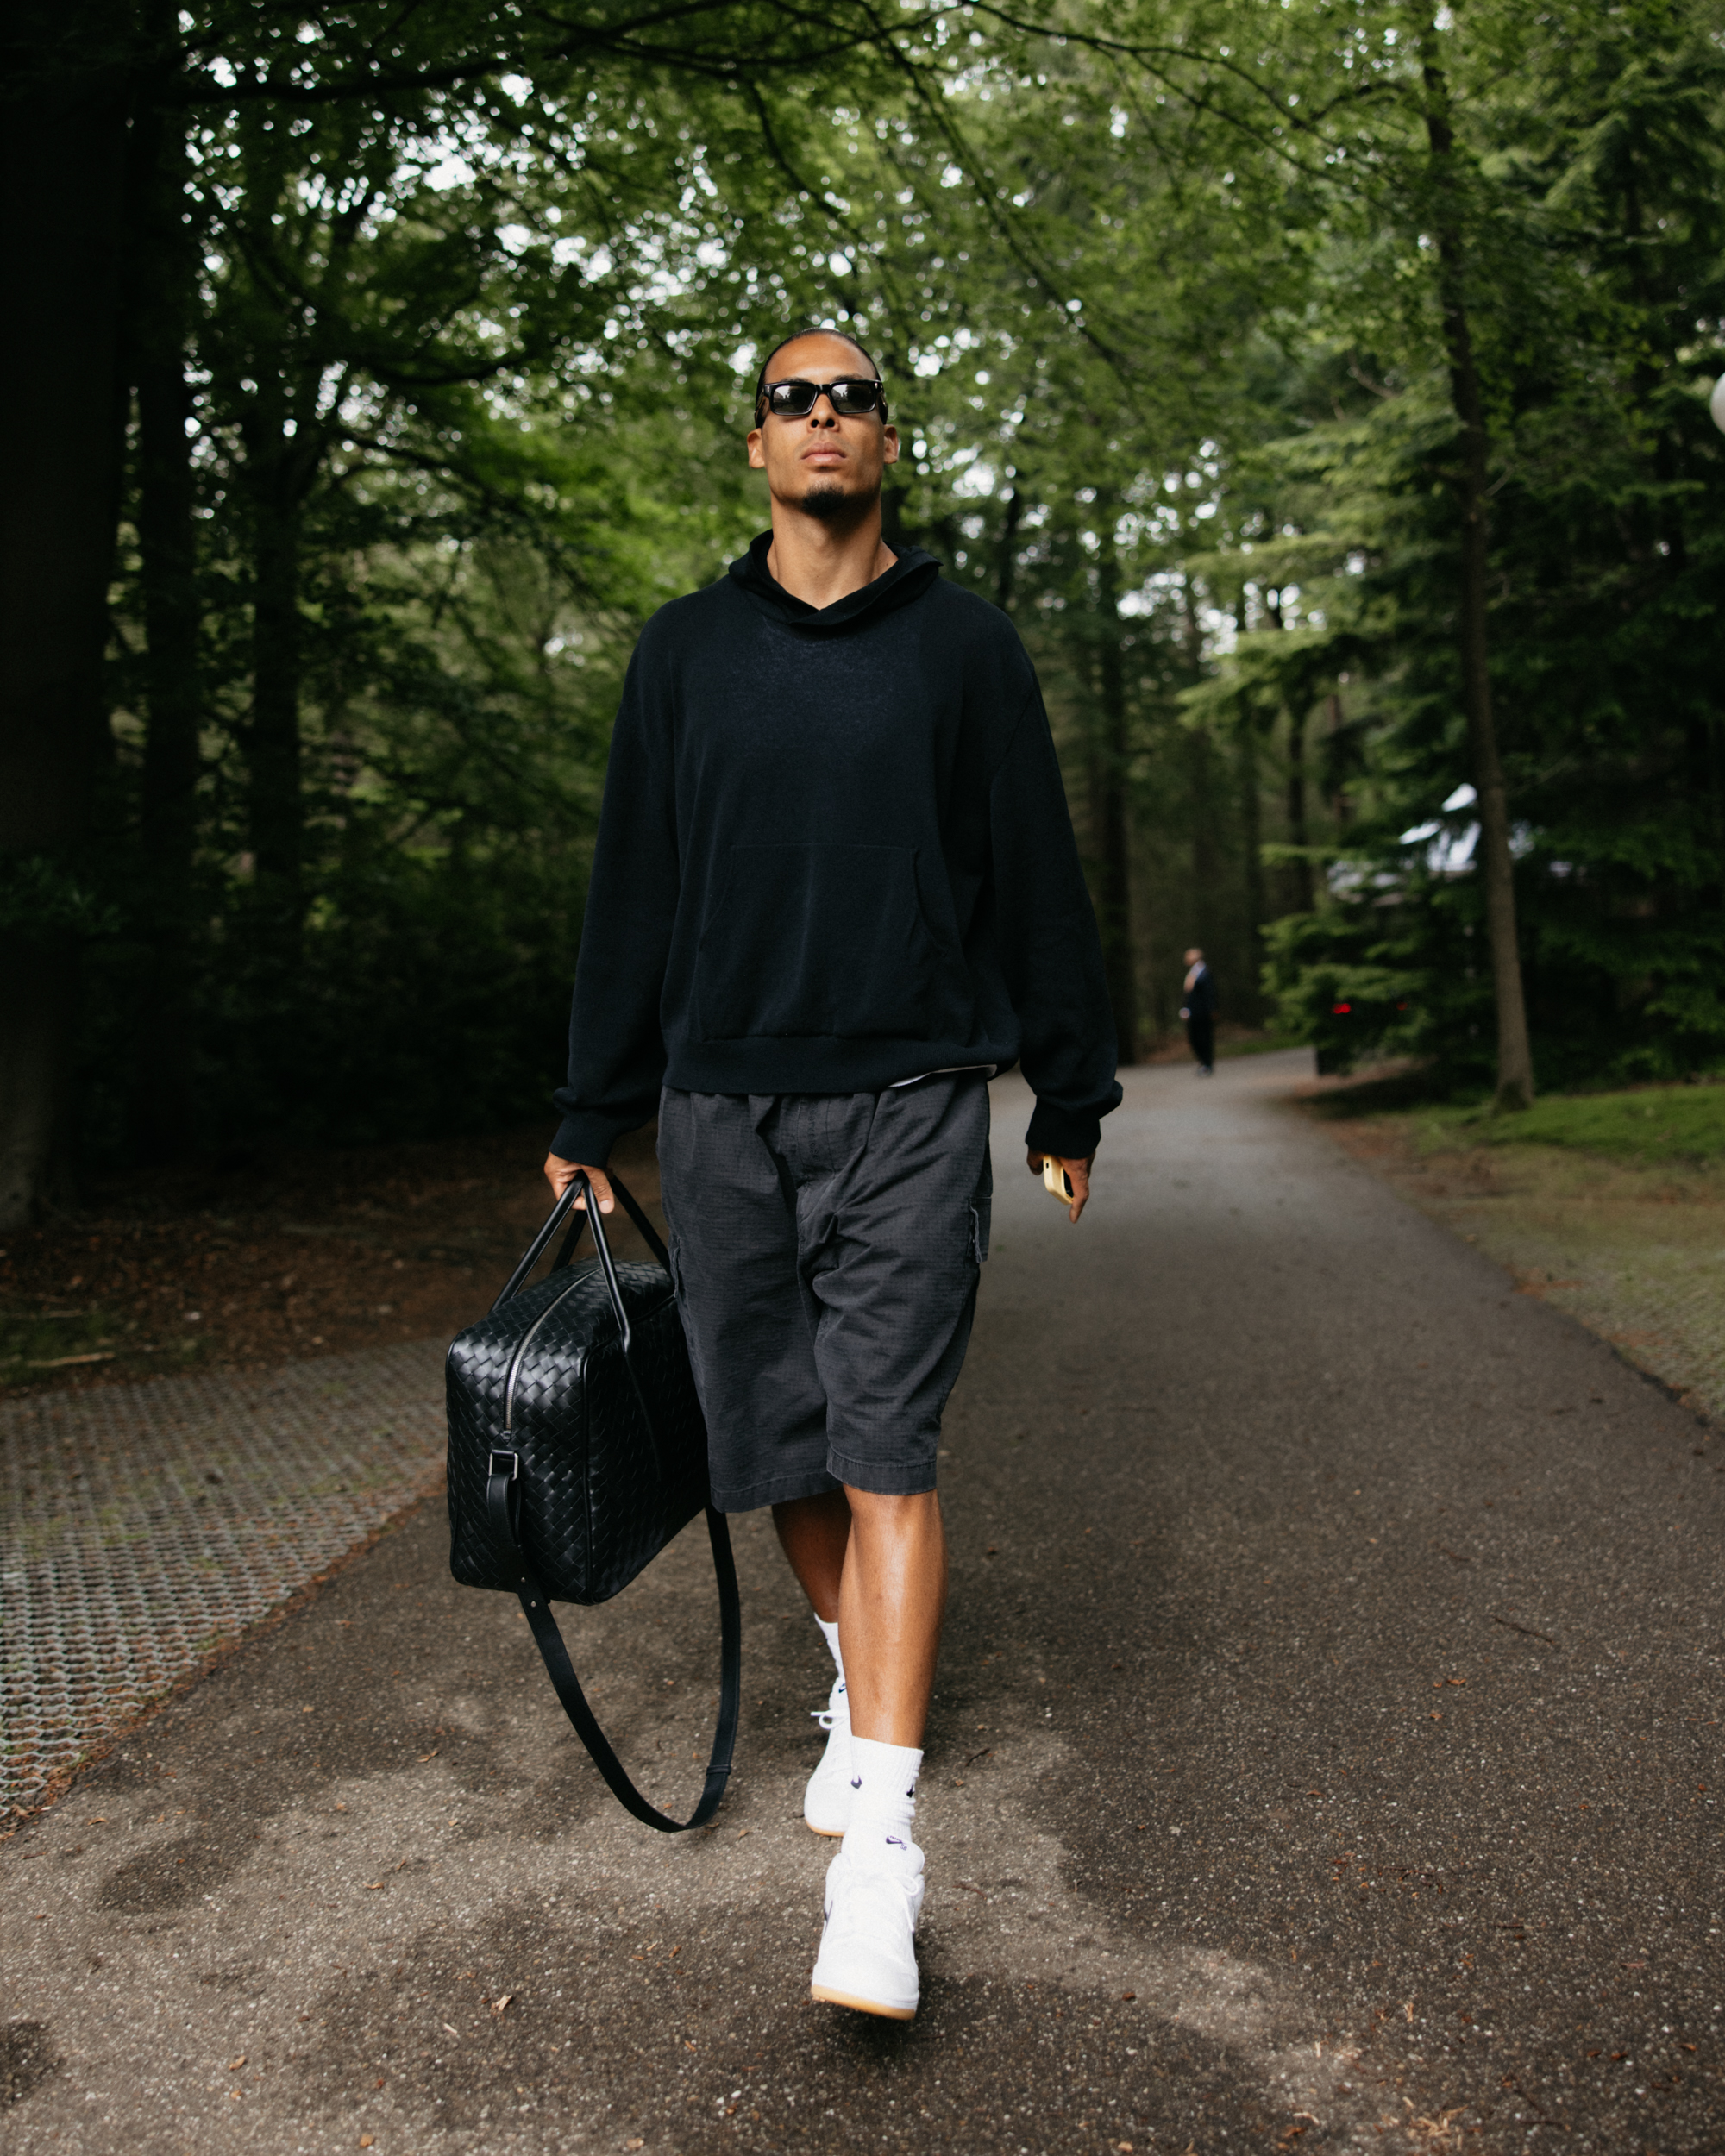 Virgil van Dijk wearing sunglasses and carrying a bag as he walks into training for the Dutch National team